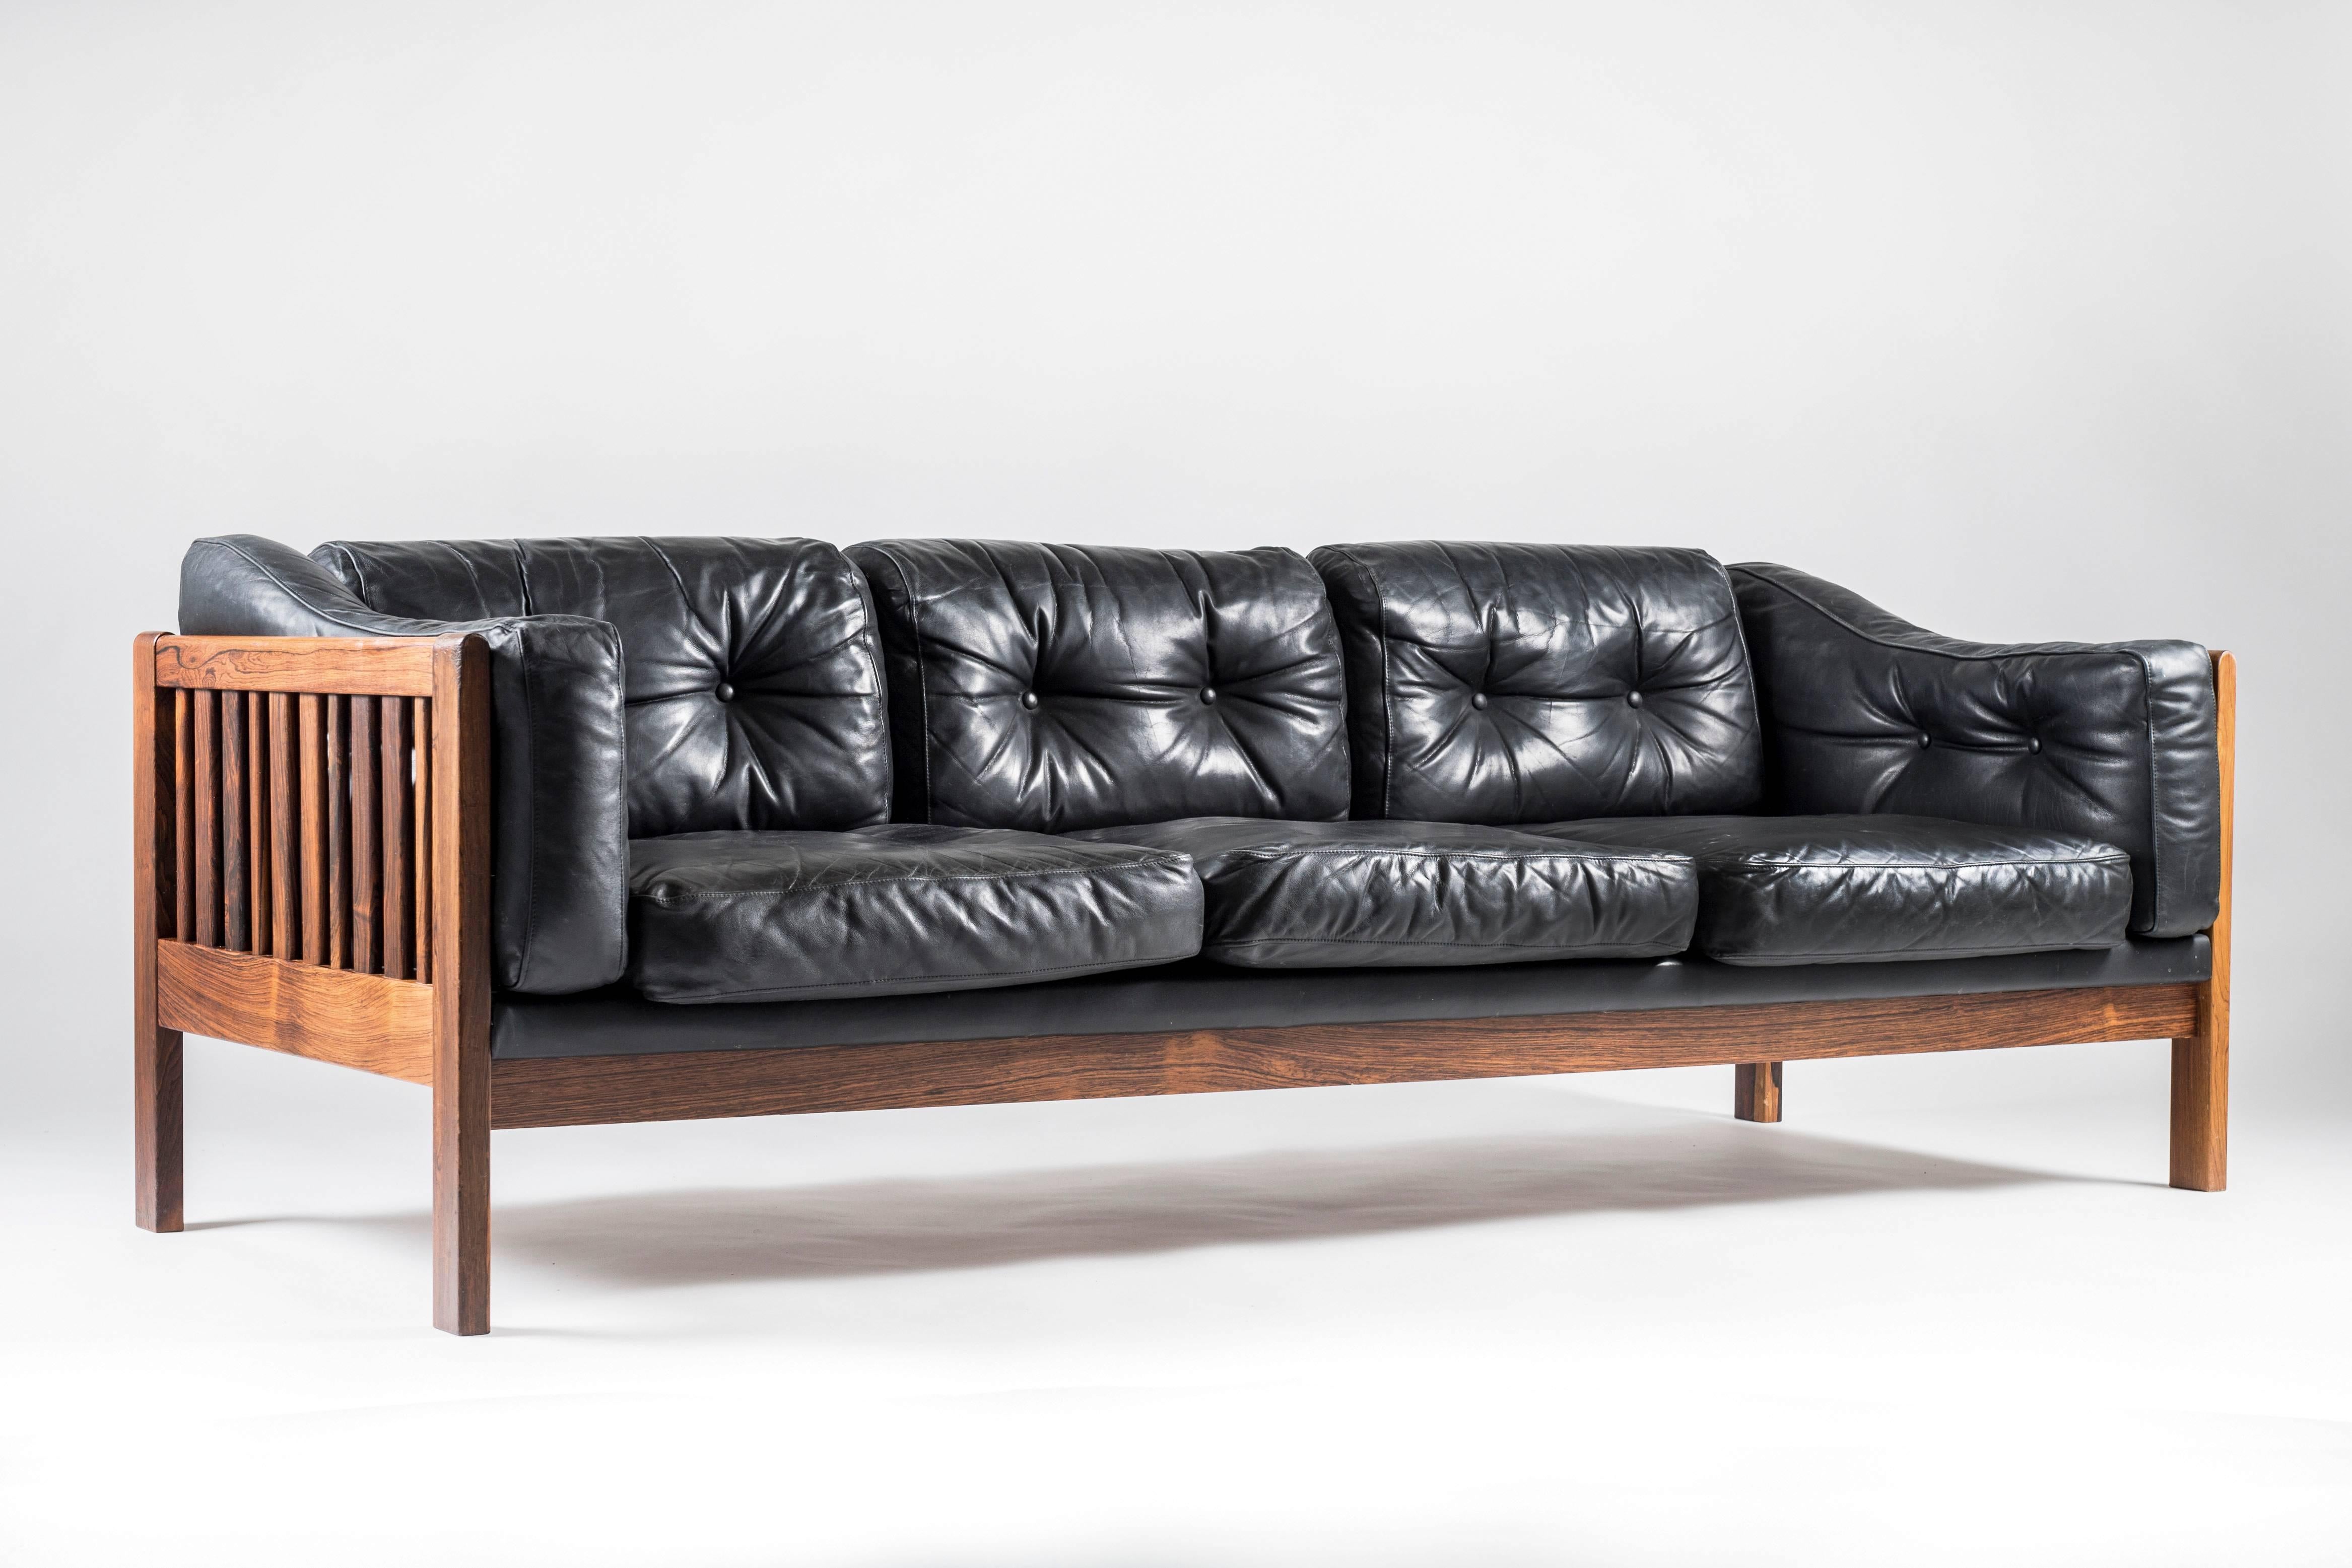 Top-quality sofa designed by Ingvar Stockum for Futura Möbler in 1965. This sofa was only in production for two years because production costs were too high. This luxury version with its frame made of solid rosewood and black leather cushions filled